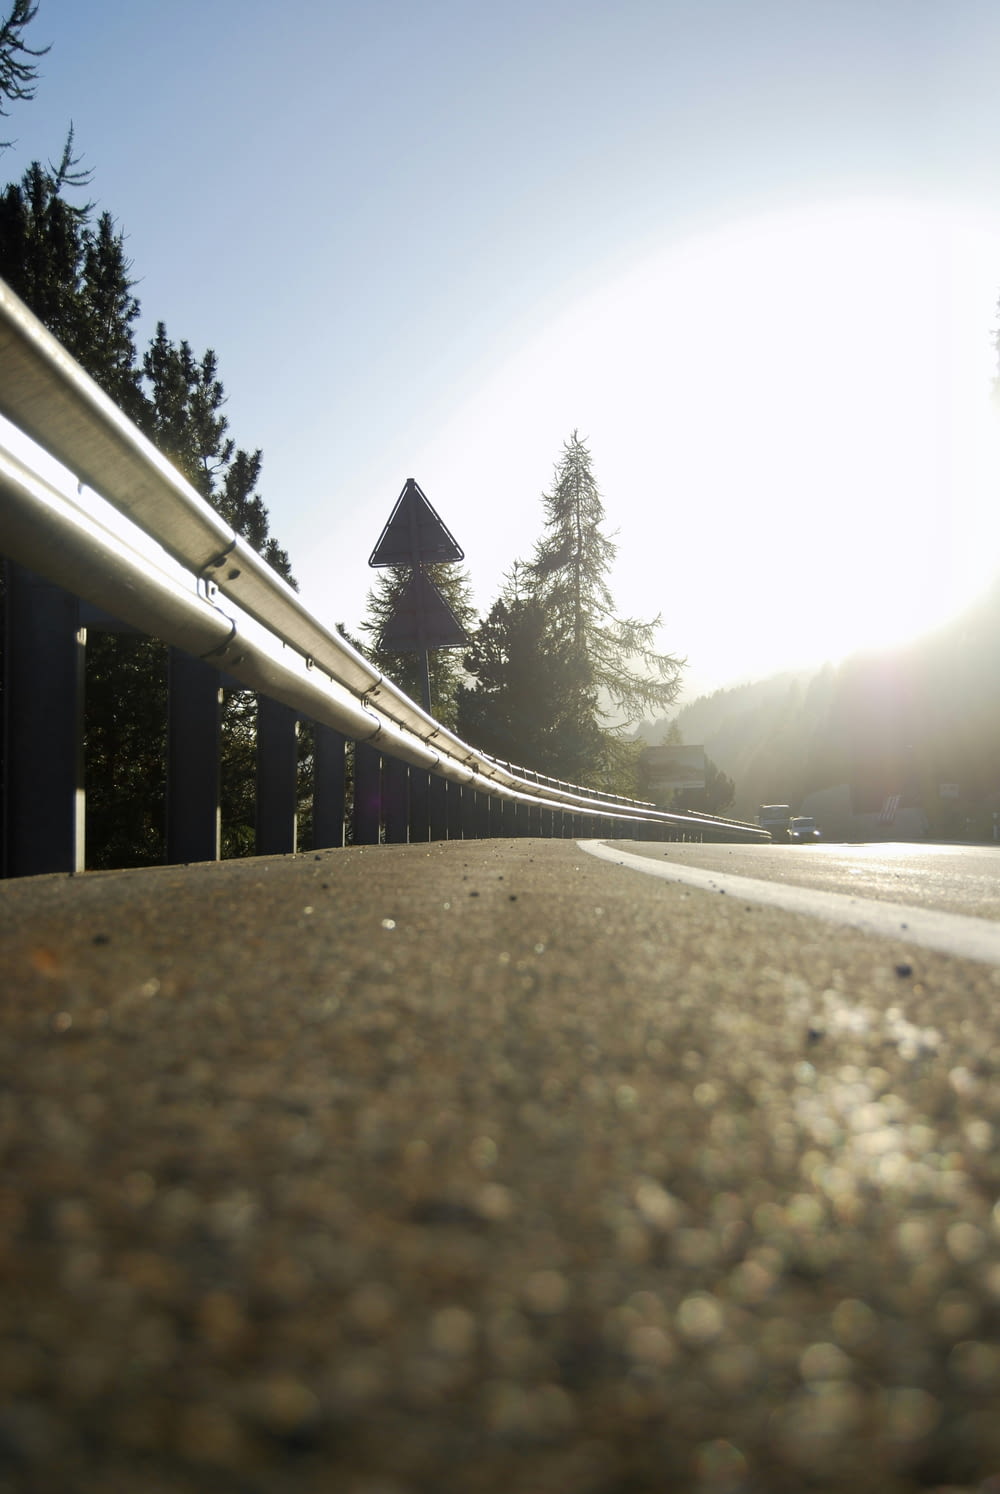 the sun is shining on a road with a metal railing